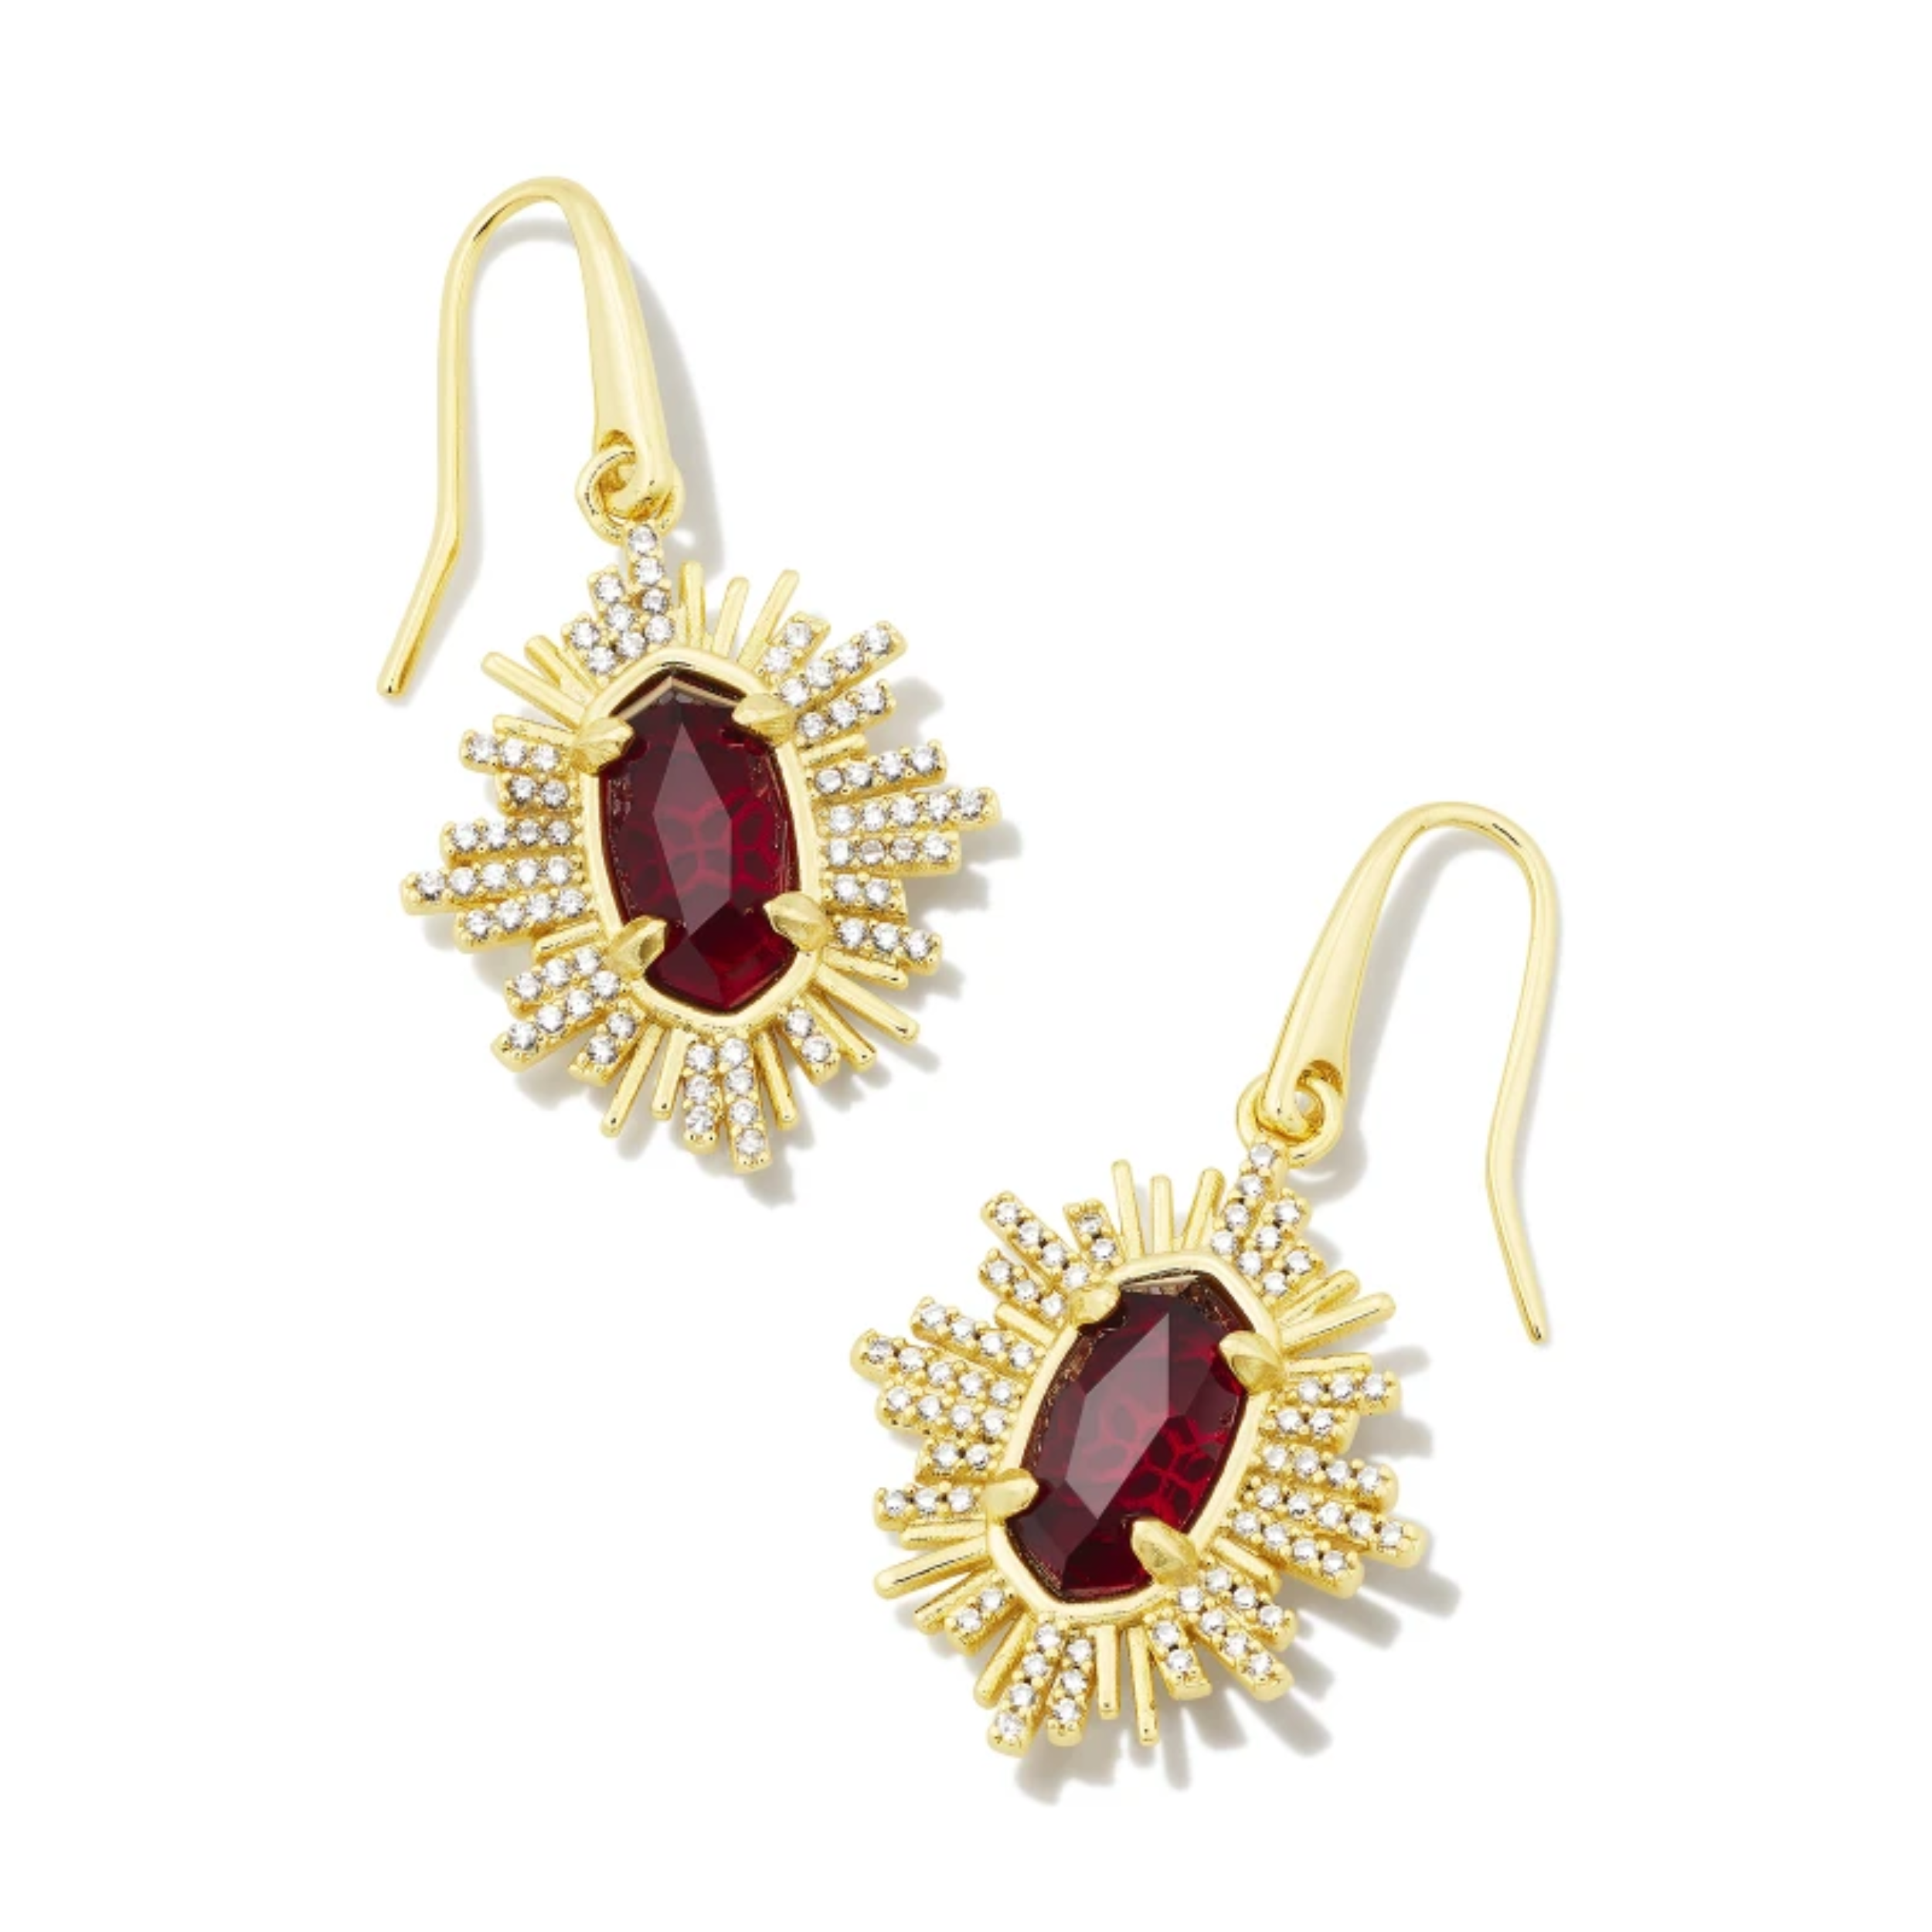 These Grayson Sunburst Gold Drop Earrings in Red Glass by Kendra Scott are pictured on a white background.